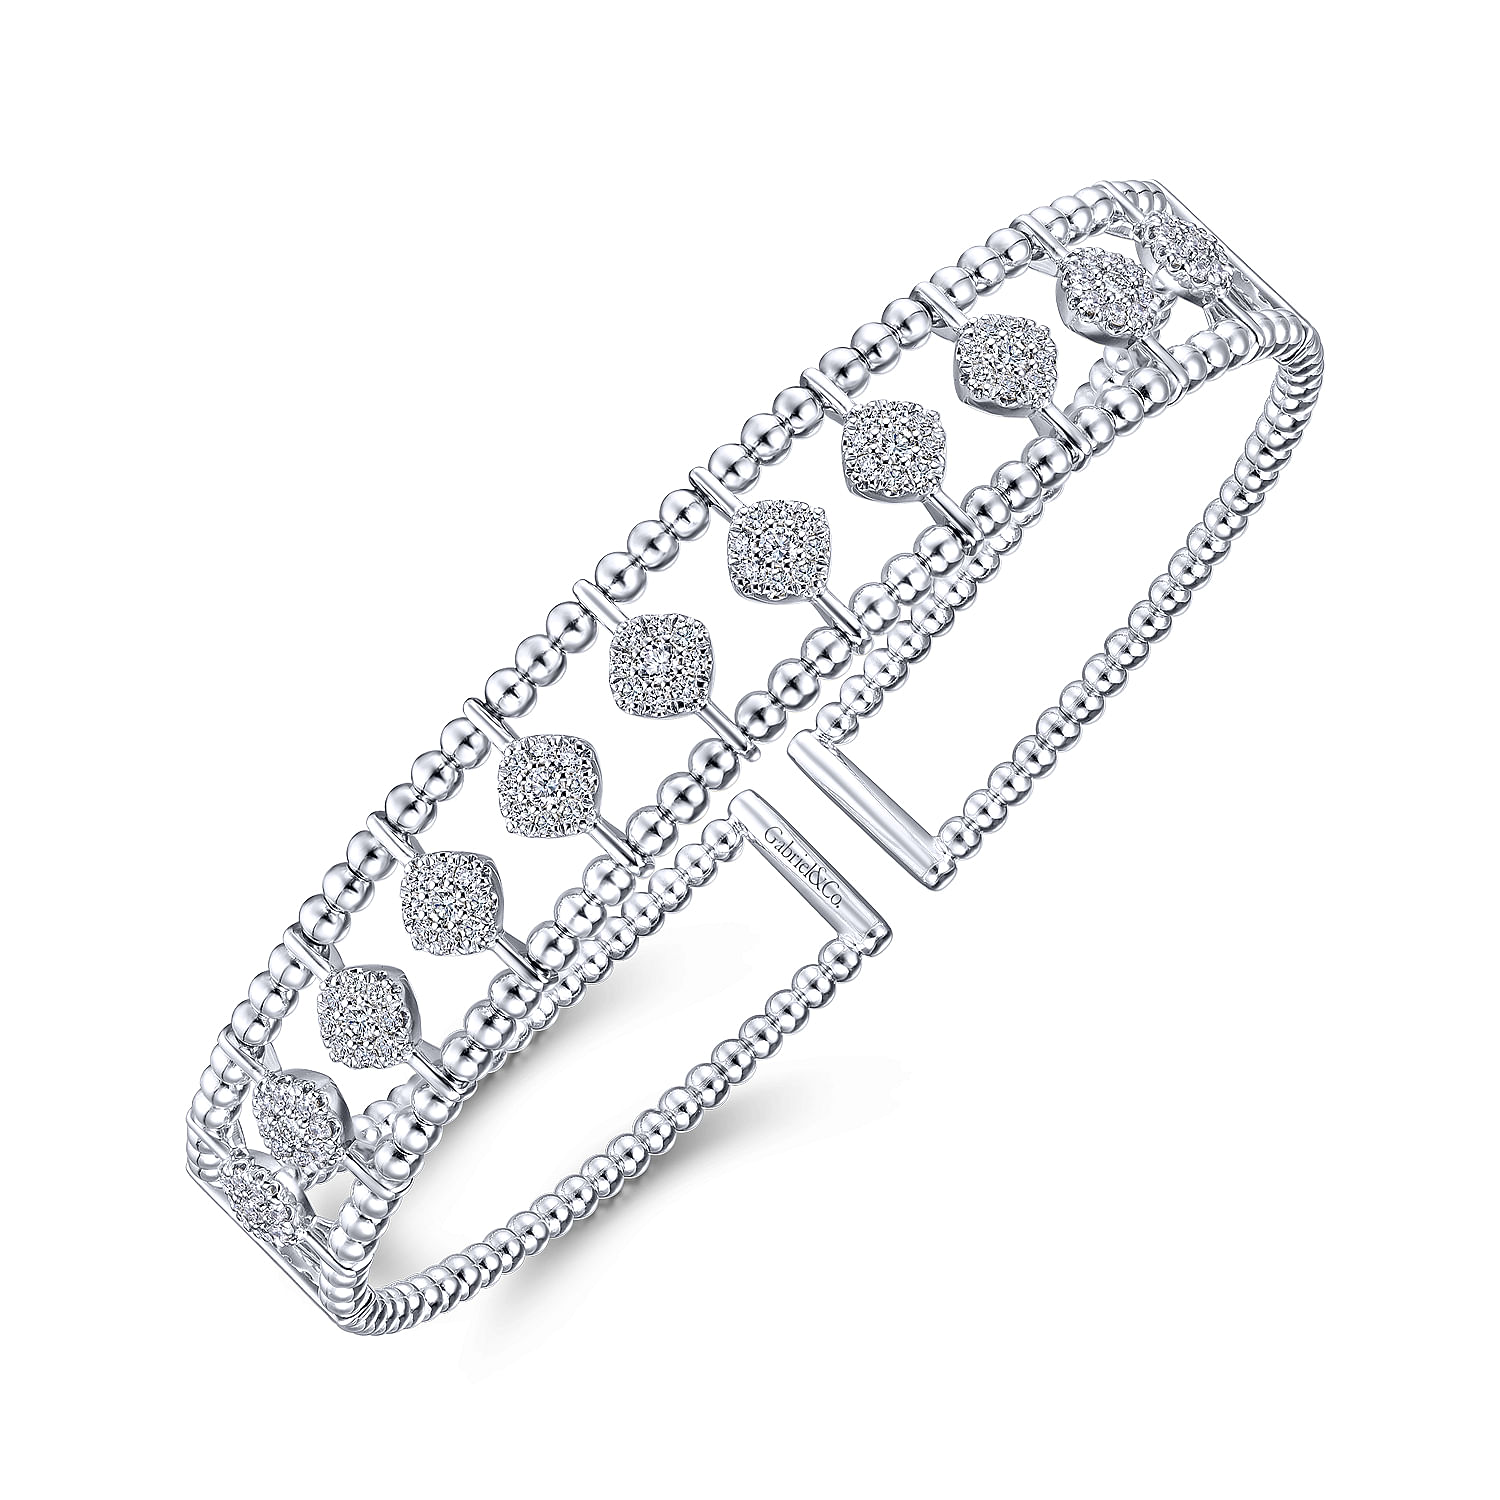 14K White Gold Bujukan Bead Cuff Bracelet with Pave Diamond Connectors - 0.85 ct - Shot 2